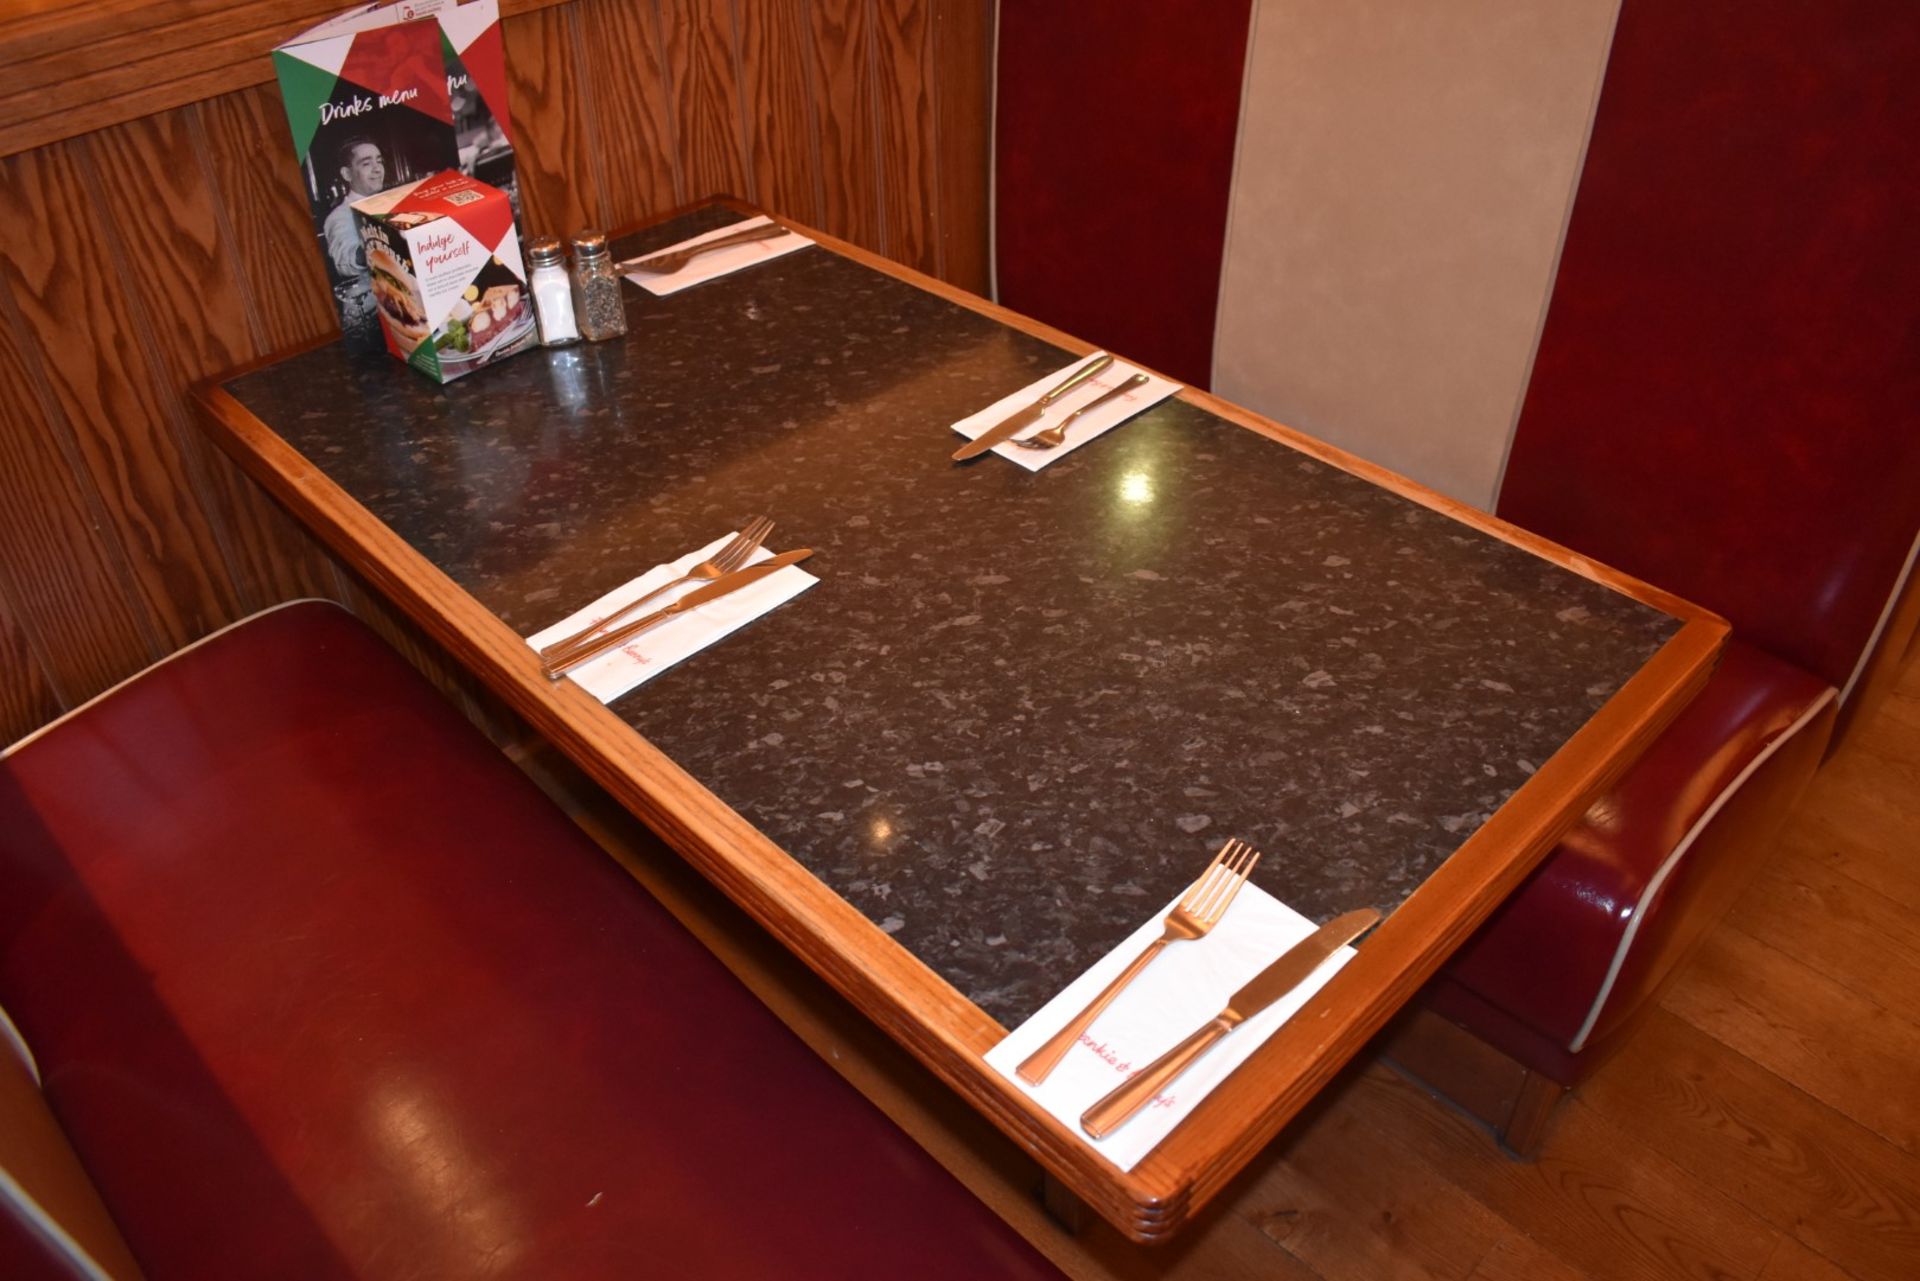 2 x Double Seating Booths and 1 x Table - Upholstered in a Red and Cream Retro Style Faux Leather - Image 3 of 5